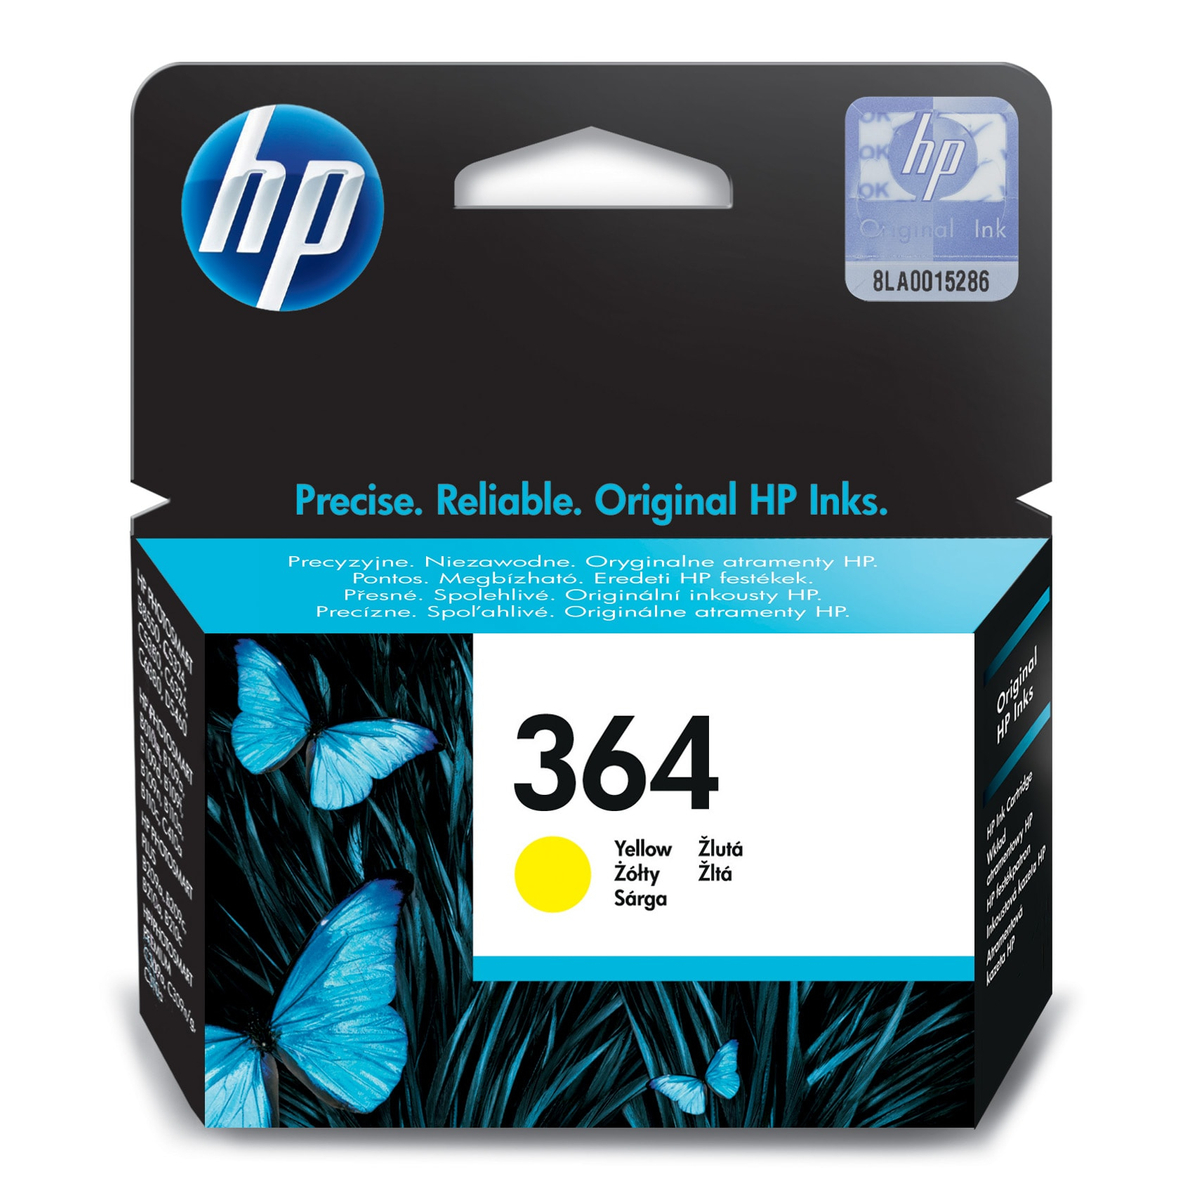 Hp 364 Yellow Ink Cartridge With Vivera